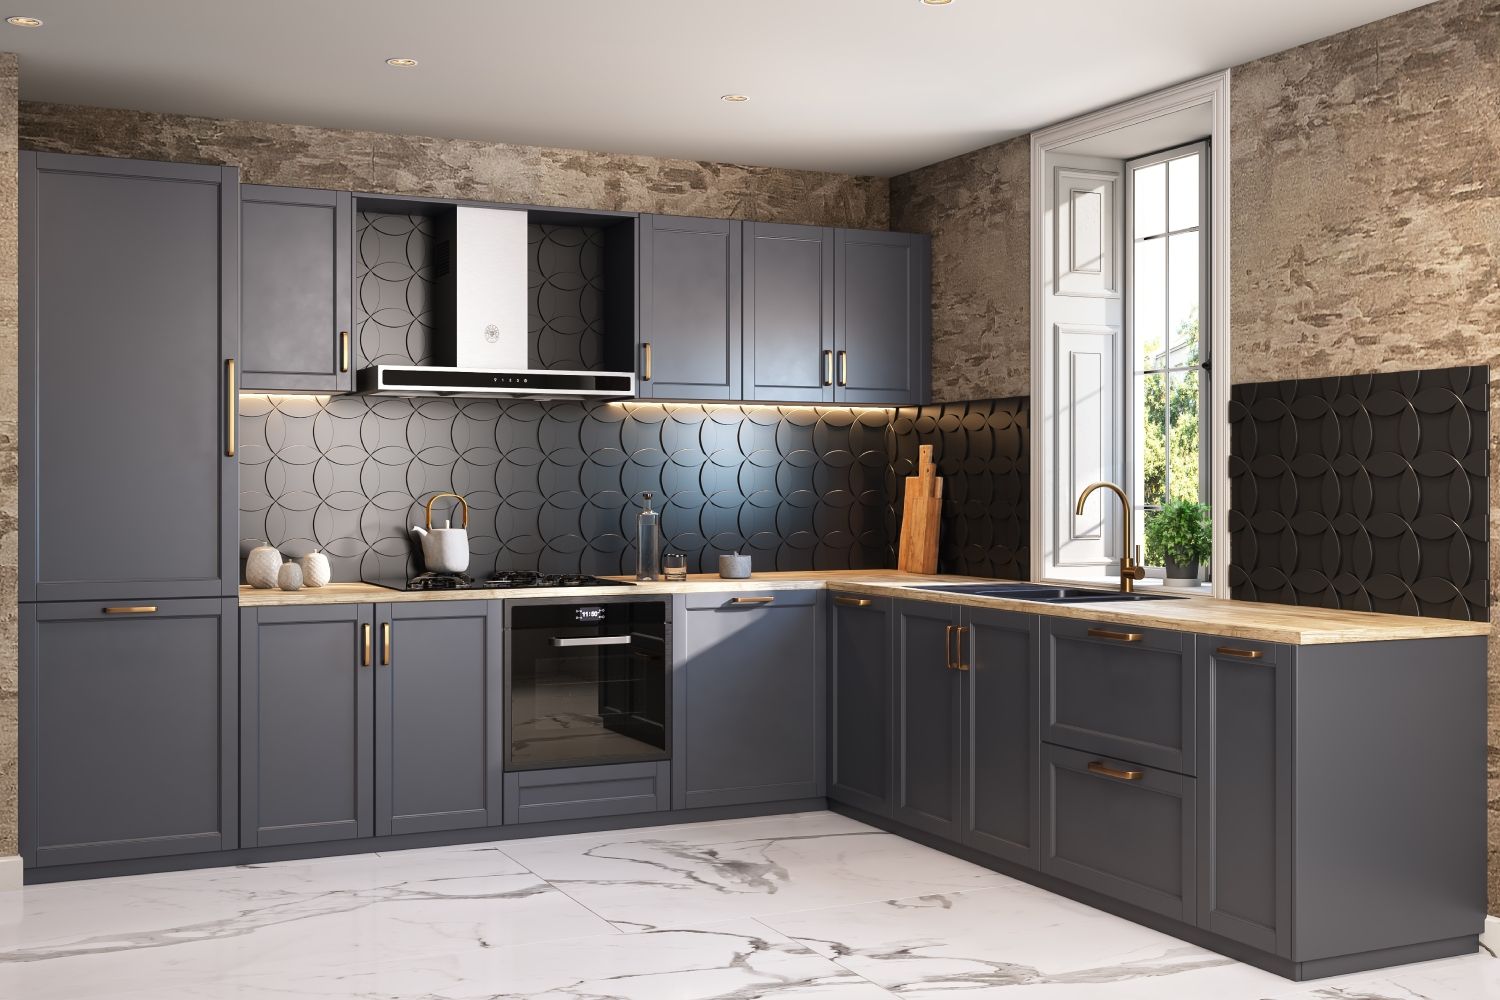 Eclectic River Stone Modular L Shaped Kitchen Cabinet Design With Black Dado Tiles